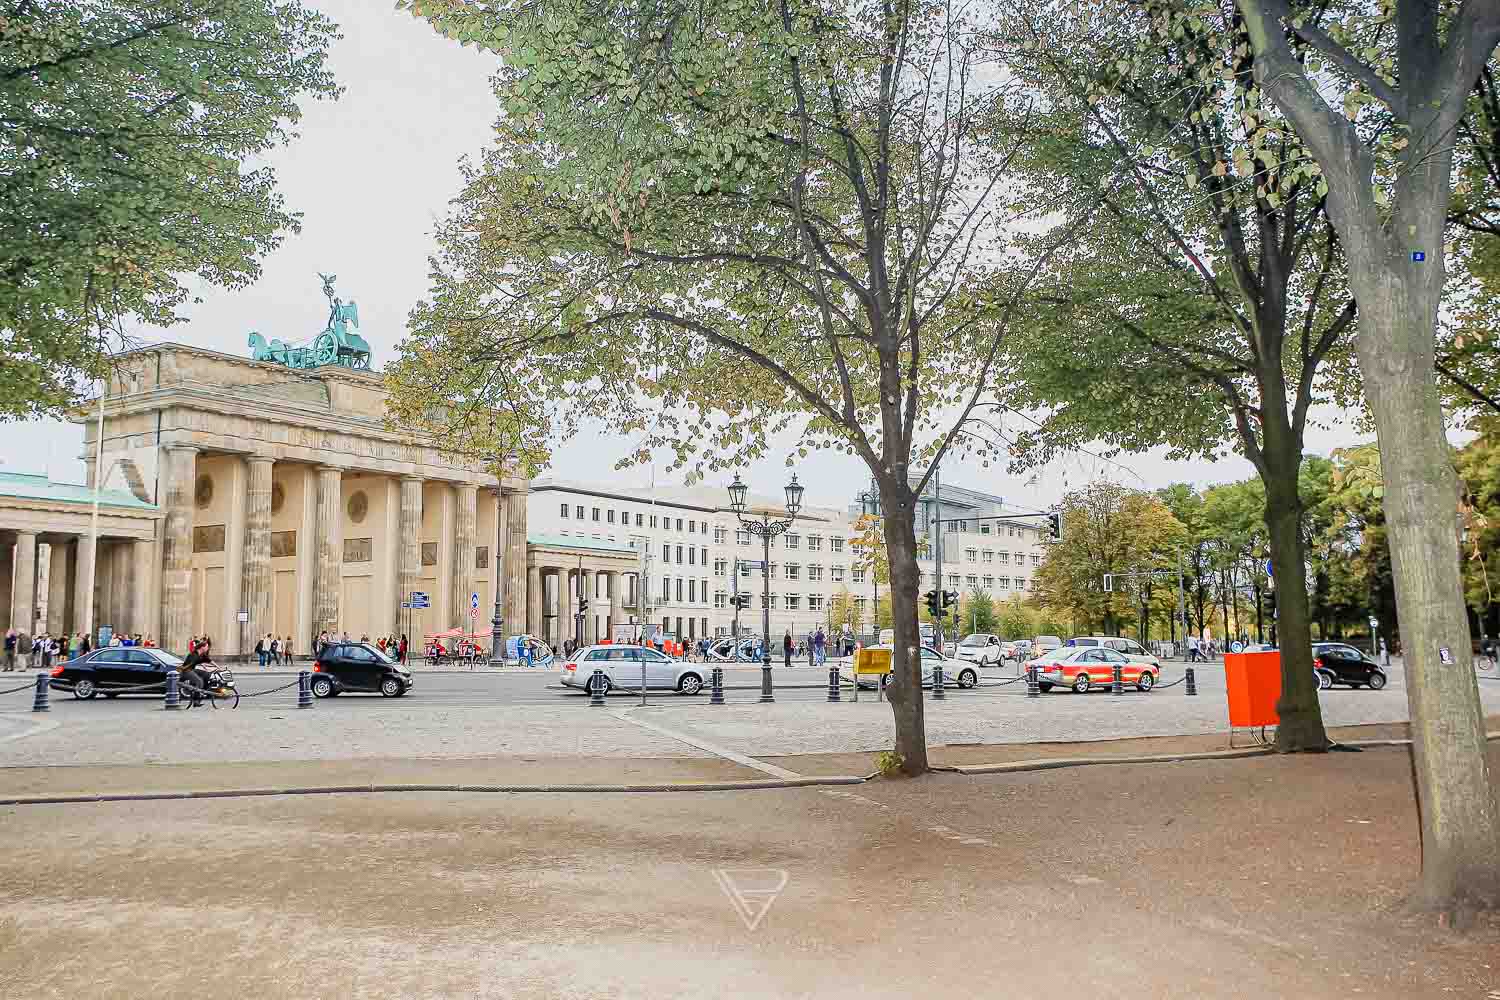 Berlin sightseeing top 10 - 24 hours in Berlin - What should you have seen in Berlin? Is it worth a sightseeing tour in Berlin - Brandenburg Gate, Victory Column, Berlin Cathedral and Reichstag, sightseeing and opening hours - Luxury Travel Blog Germany